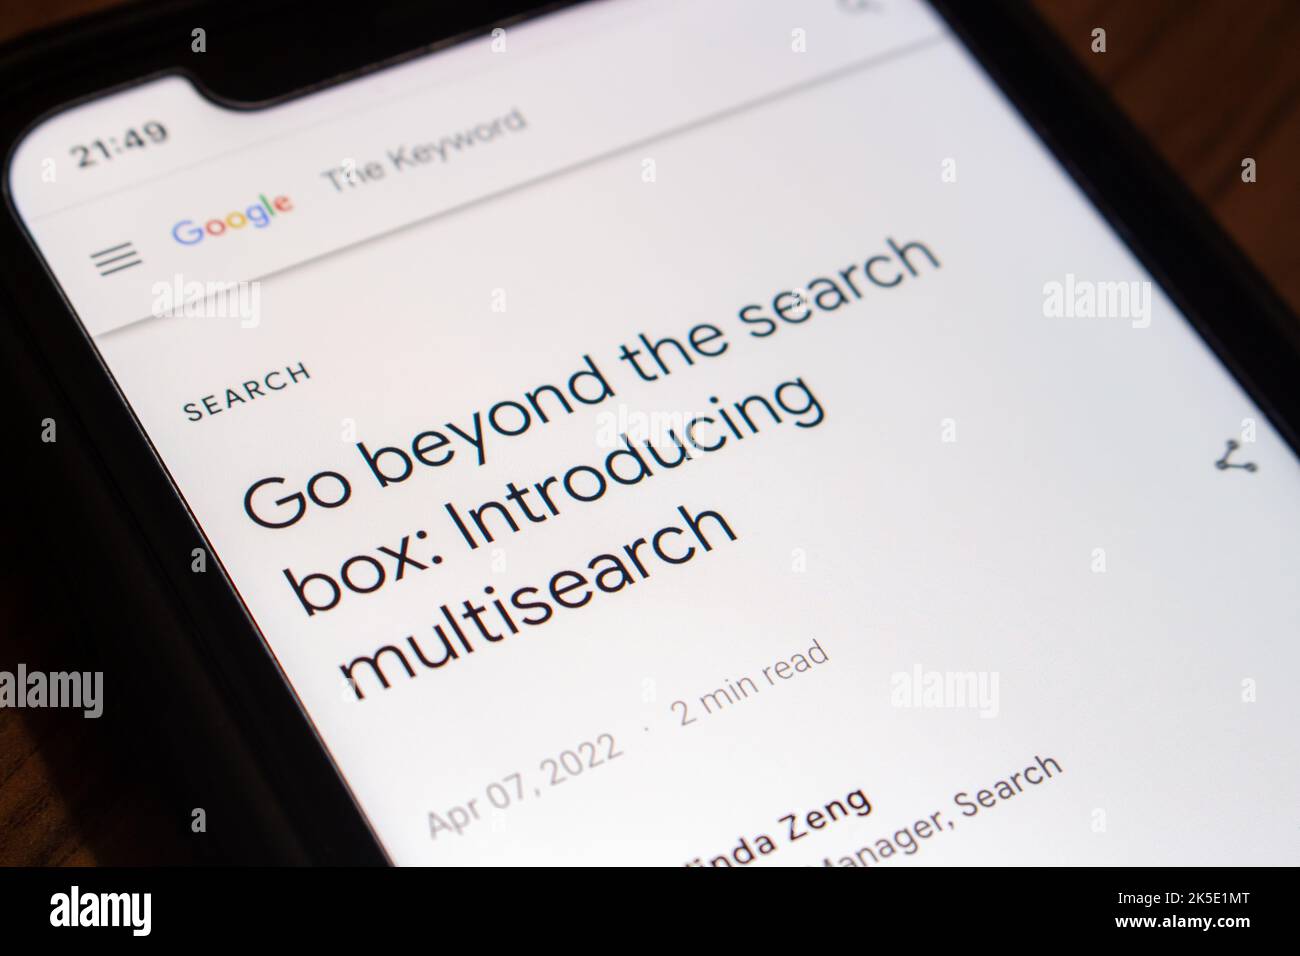 Vancouver, CANADA - Oct 6 2022 : A blog post about Google multisearch in Google blog page on an iPhone. Stock Photo